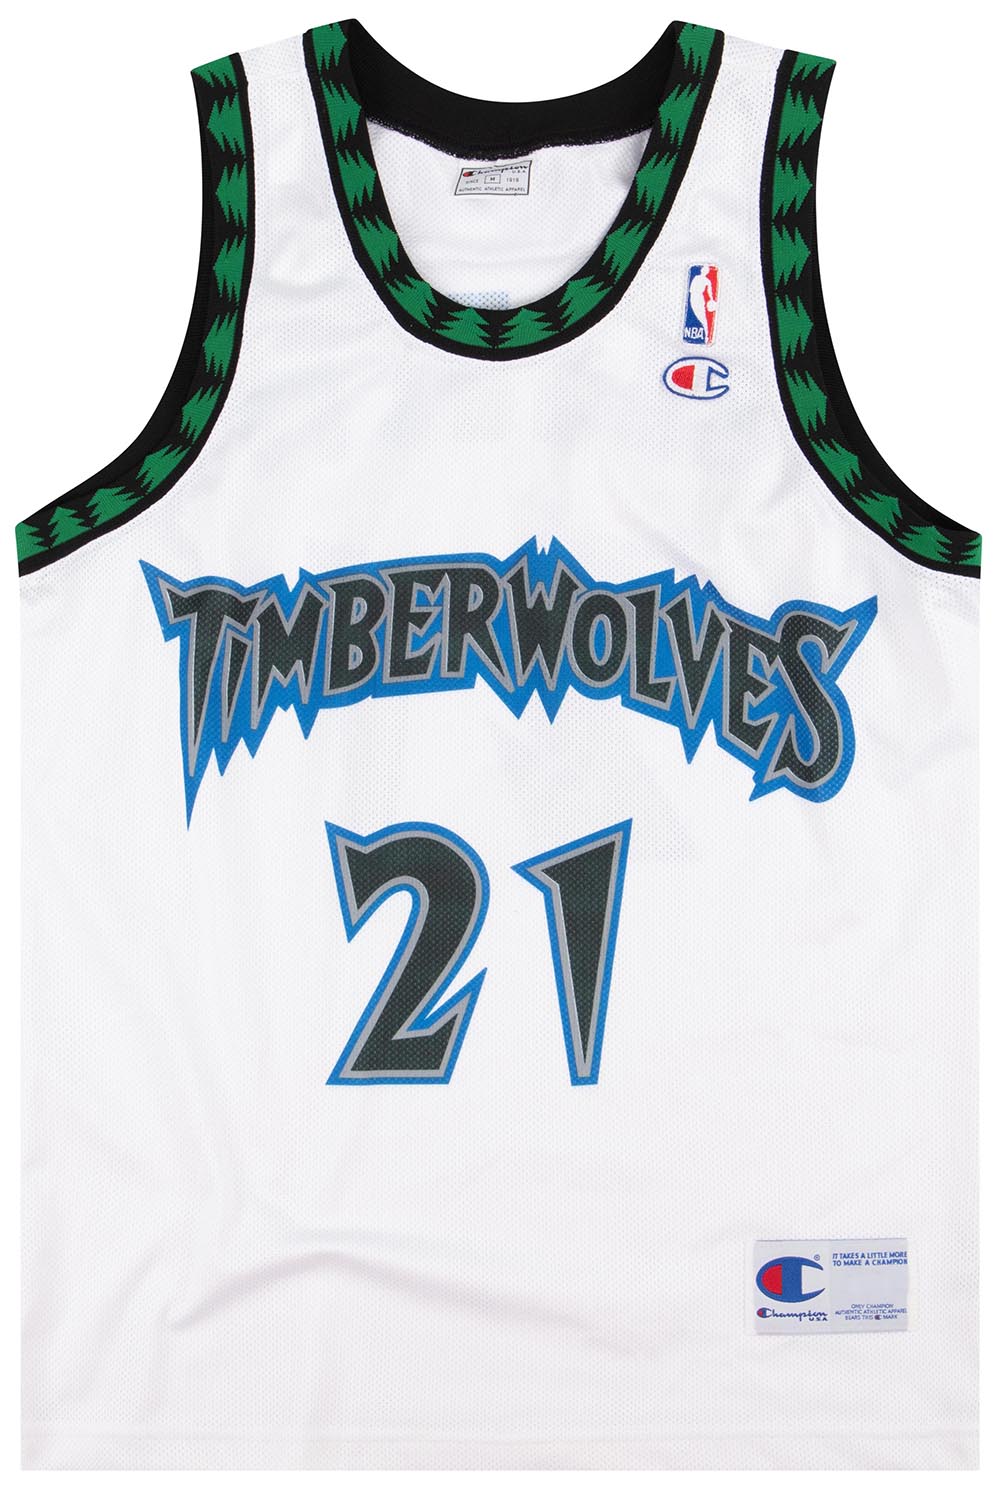 Vintage Timberwolves #21 Jersey  Urban Outfitters Japan - Clothing, Music,  Home & Accessories